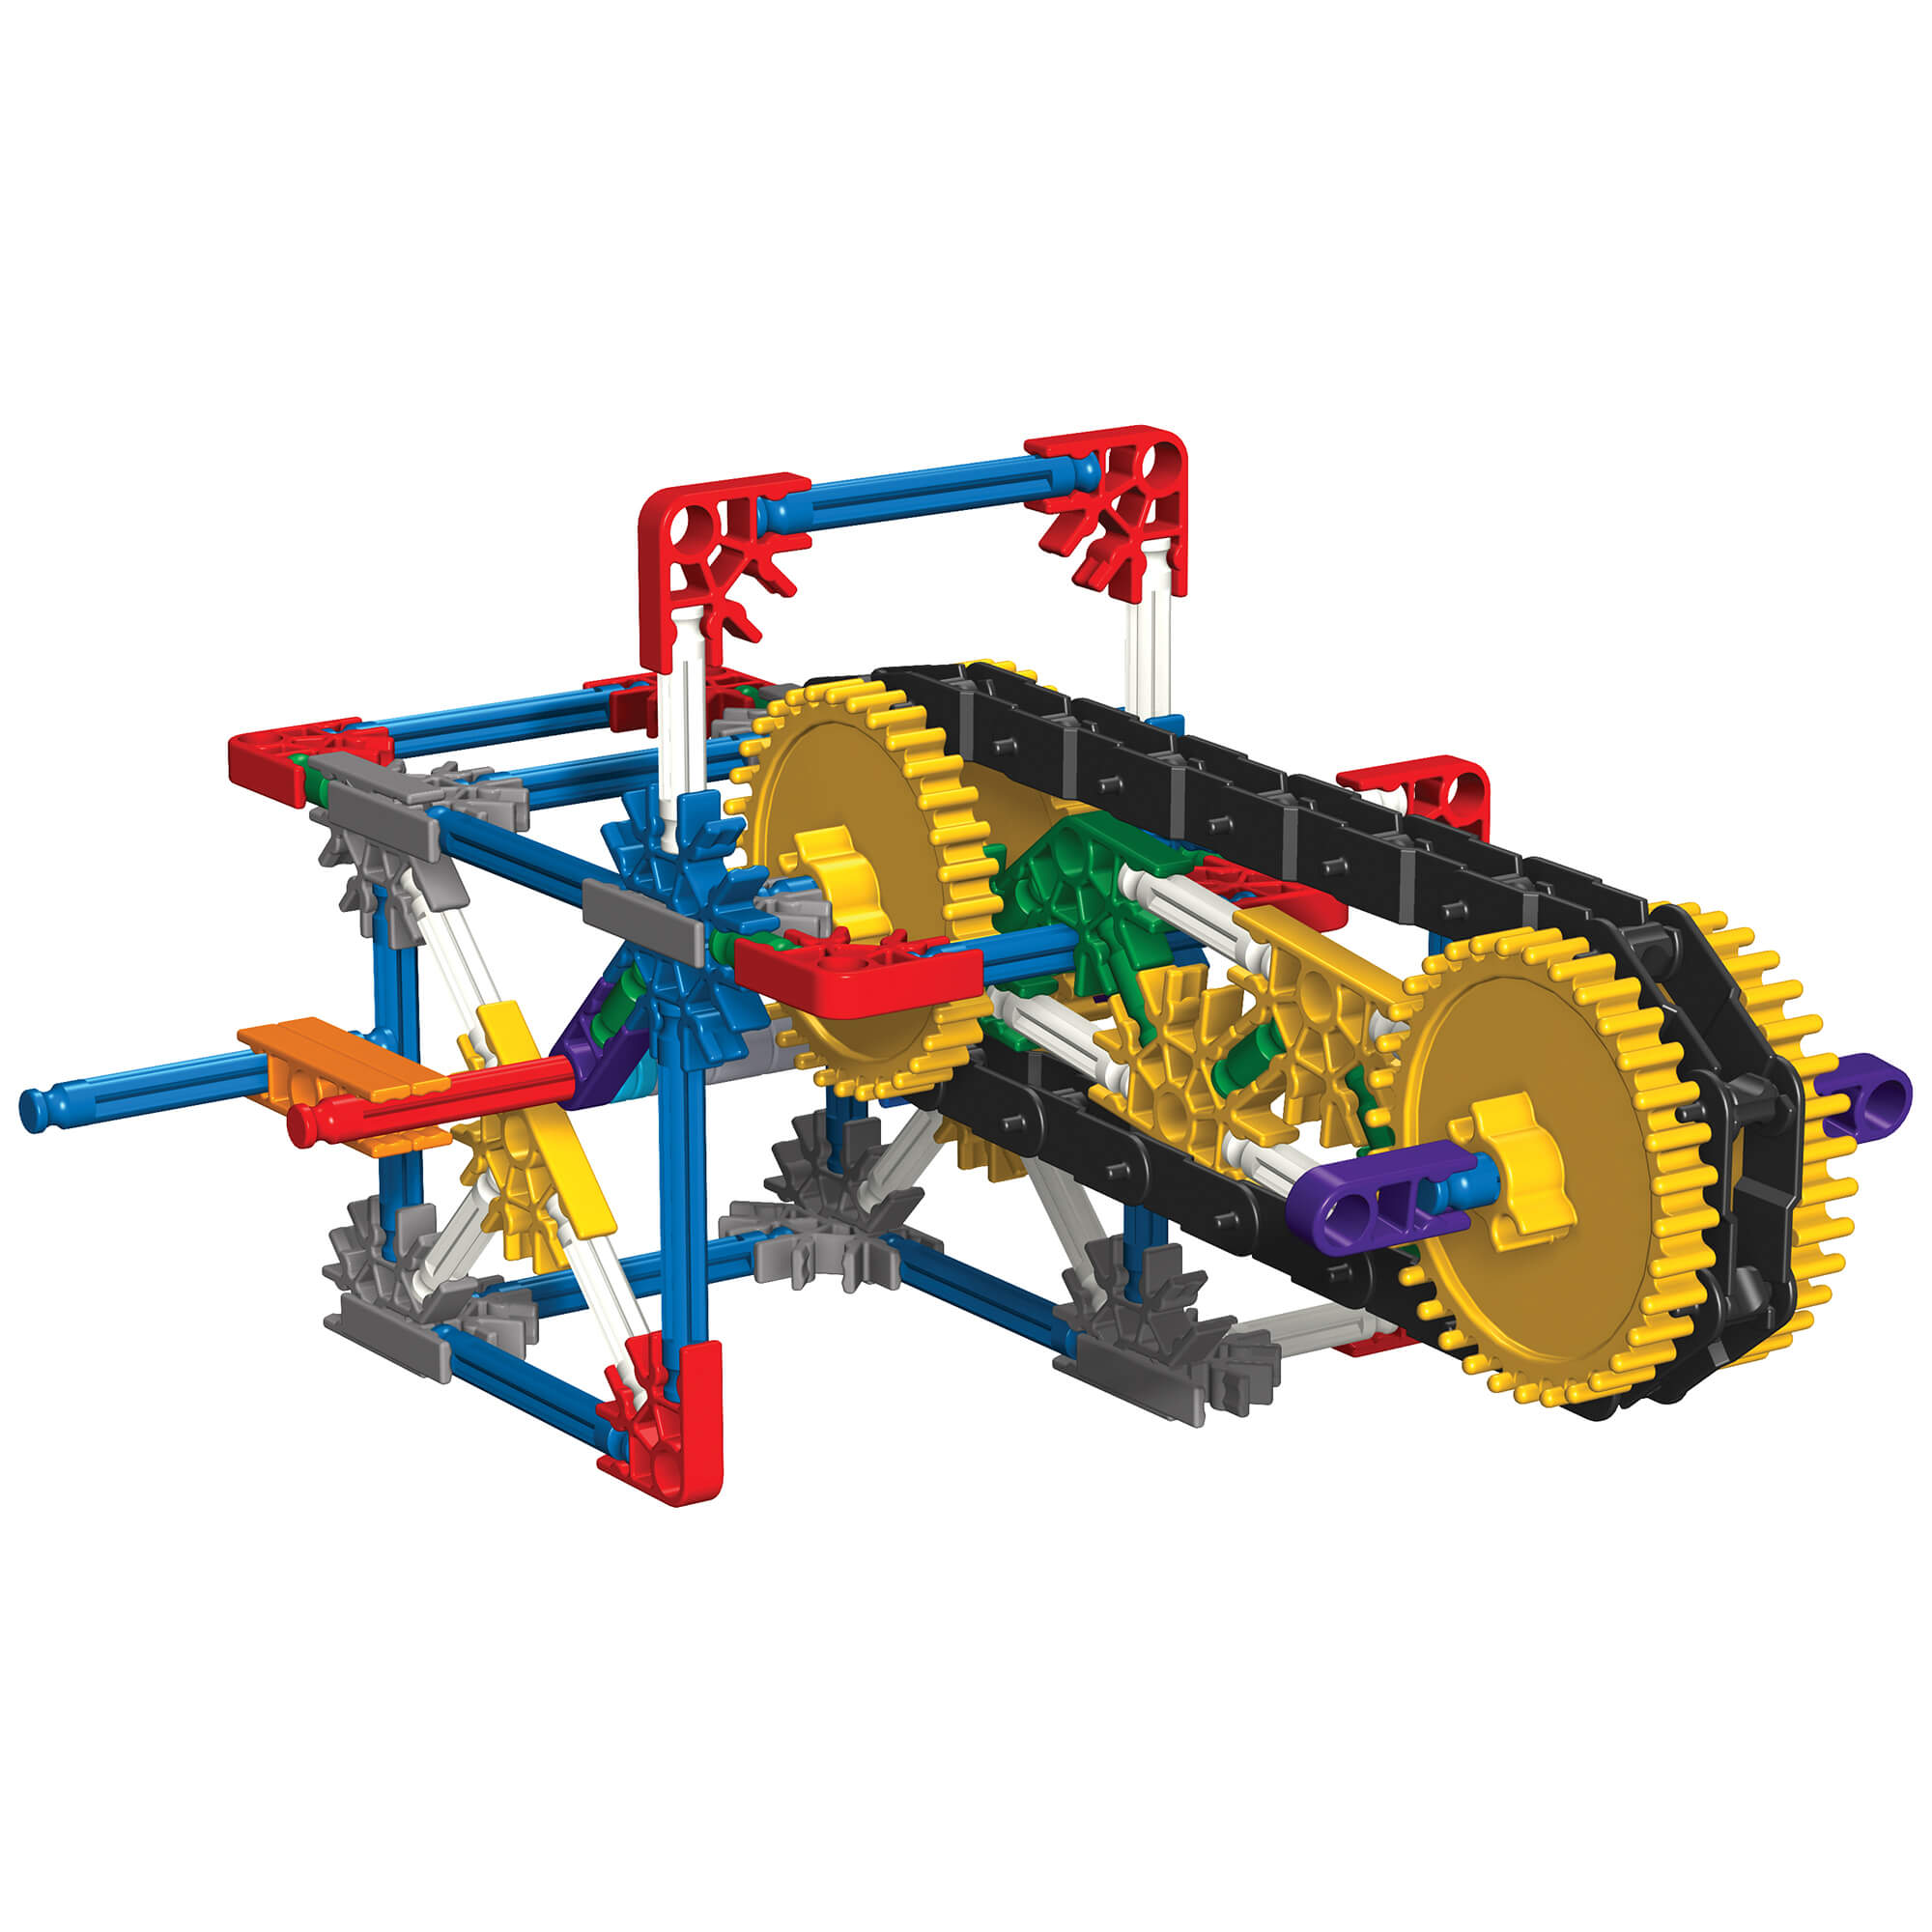 K'NEX Education Introduction to Simple Machines: Gears